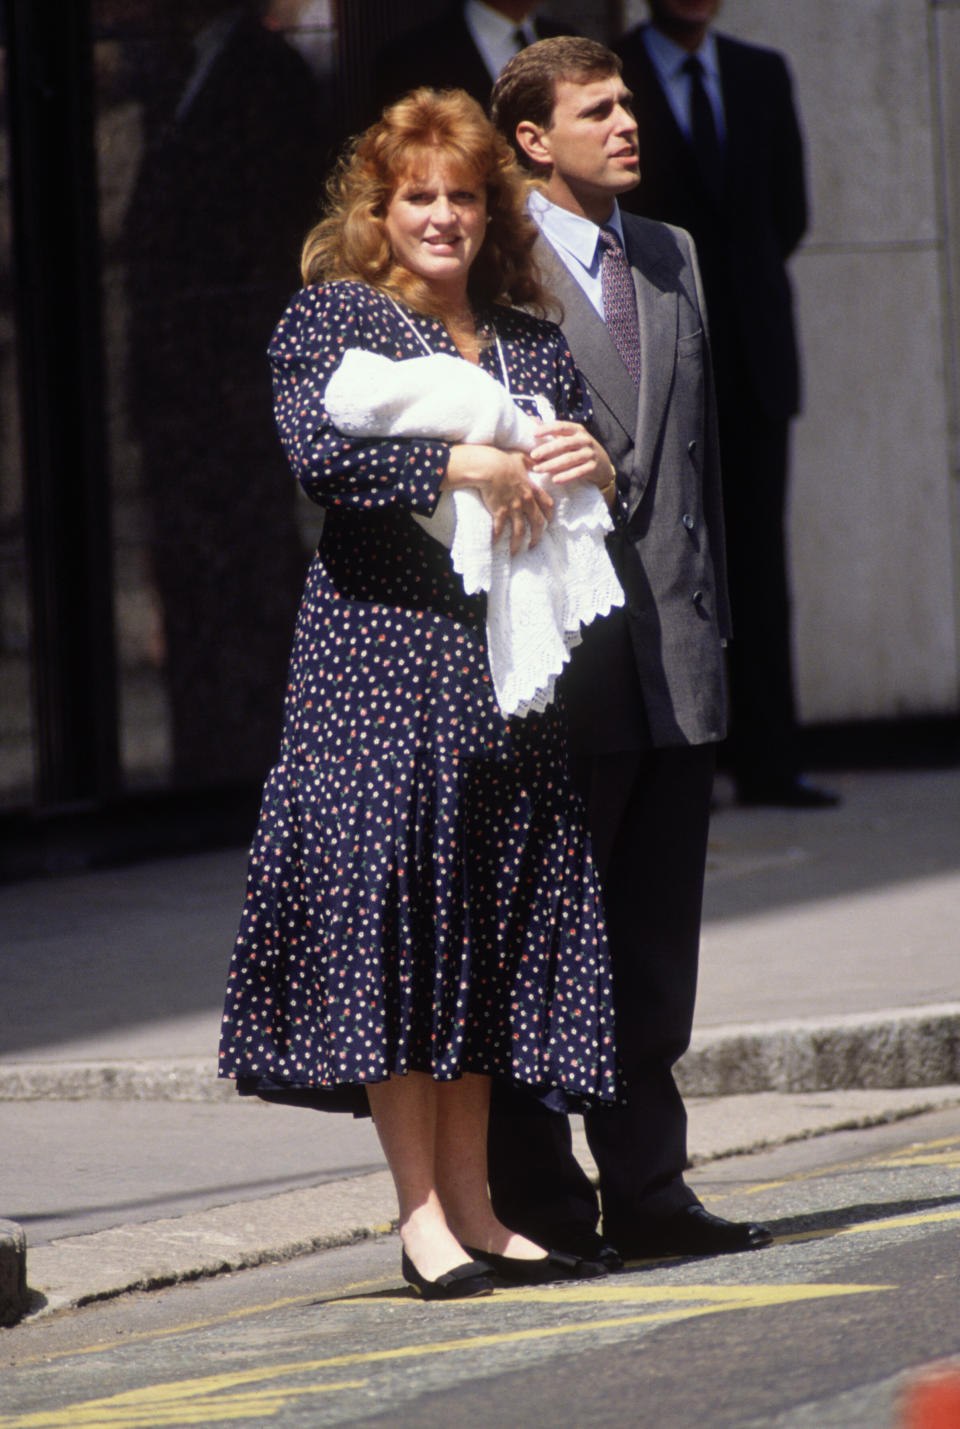 Sarah Ferguson gave birth to her two daughters at The Portland Hospital.